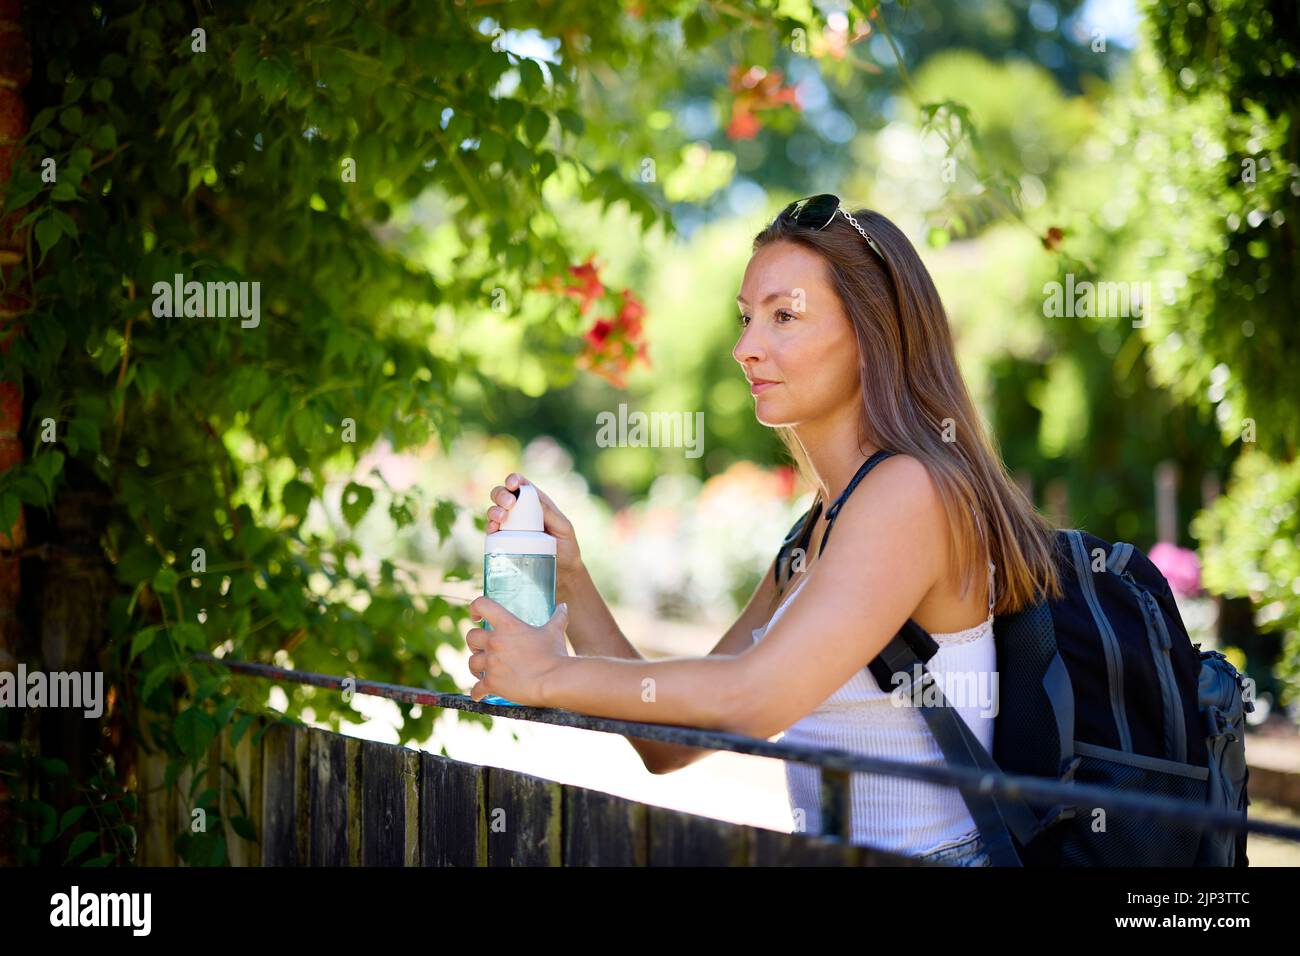 Woman relaxing outdoors with bottle of water Stock Photo